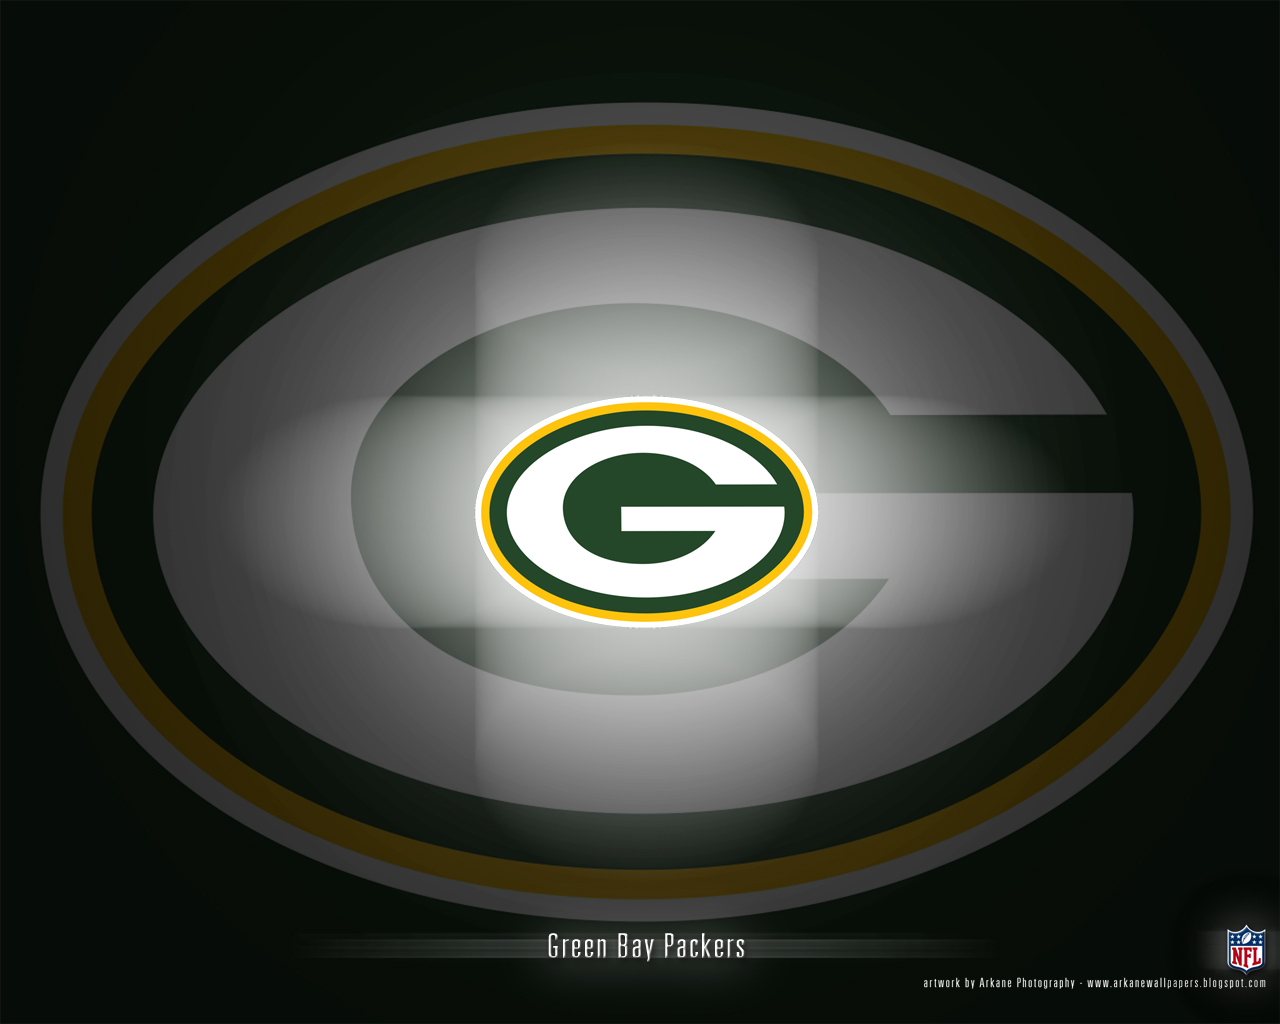 Green Bay Packers Wallpaper The